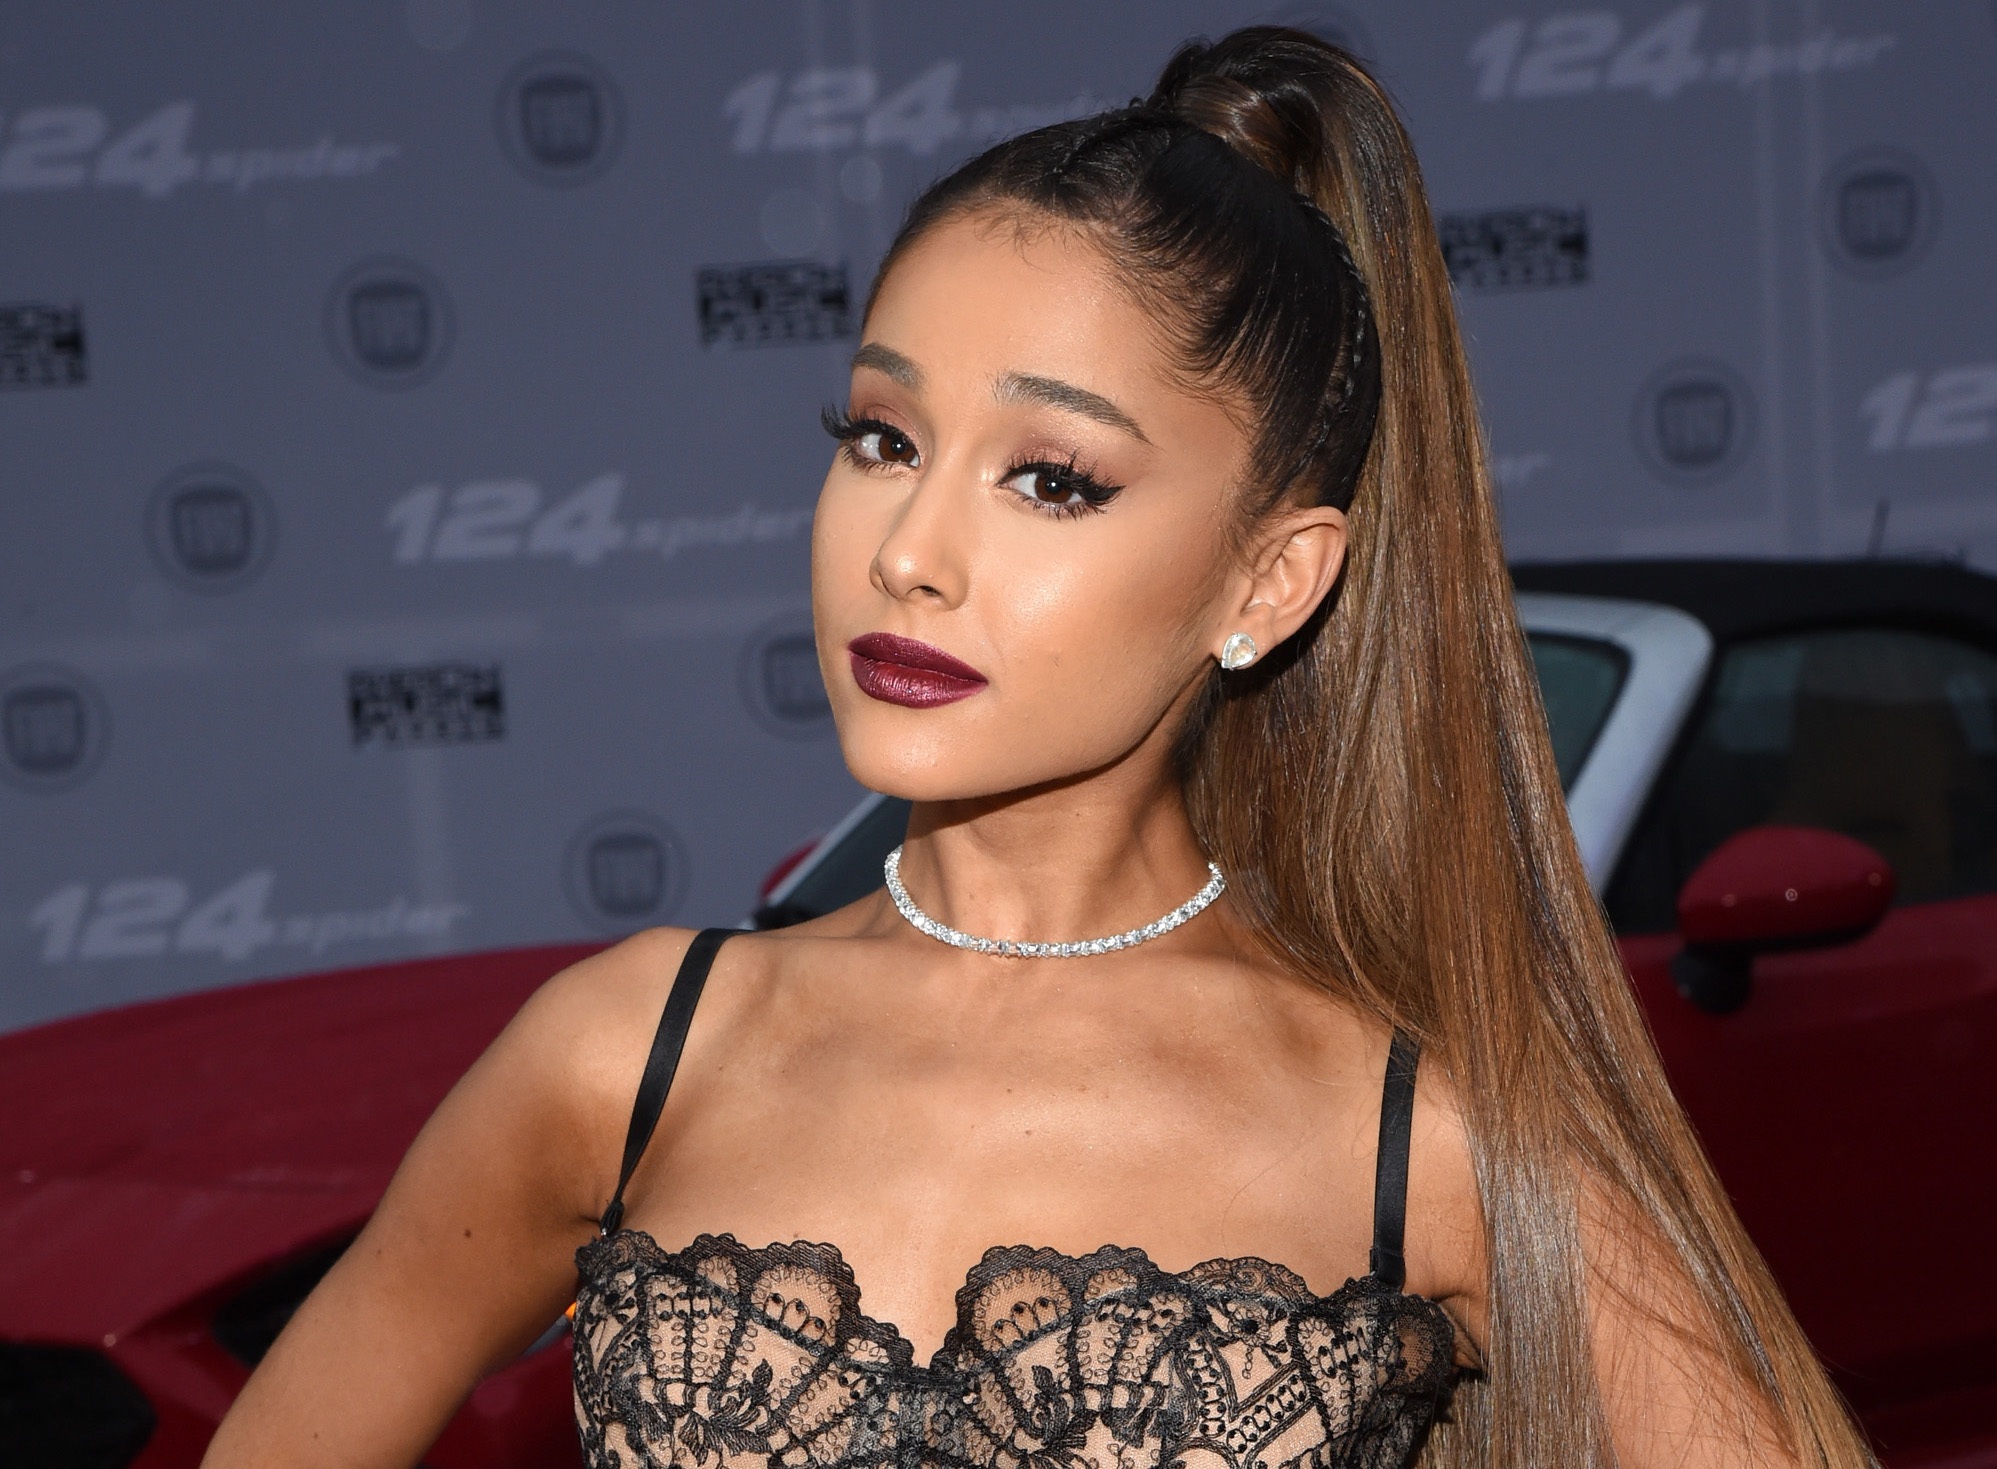 1997px x 1469px - Ariana Grande Suffered a Breakdown After Manchester Concert Bombing